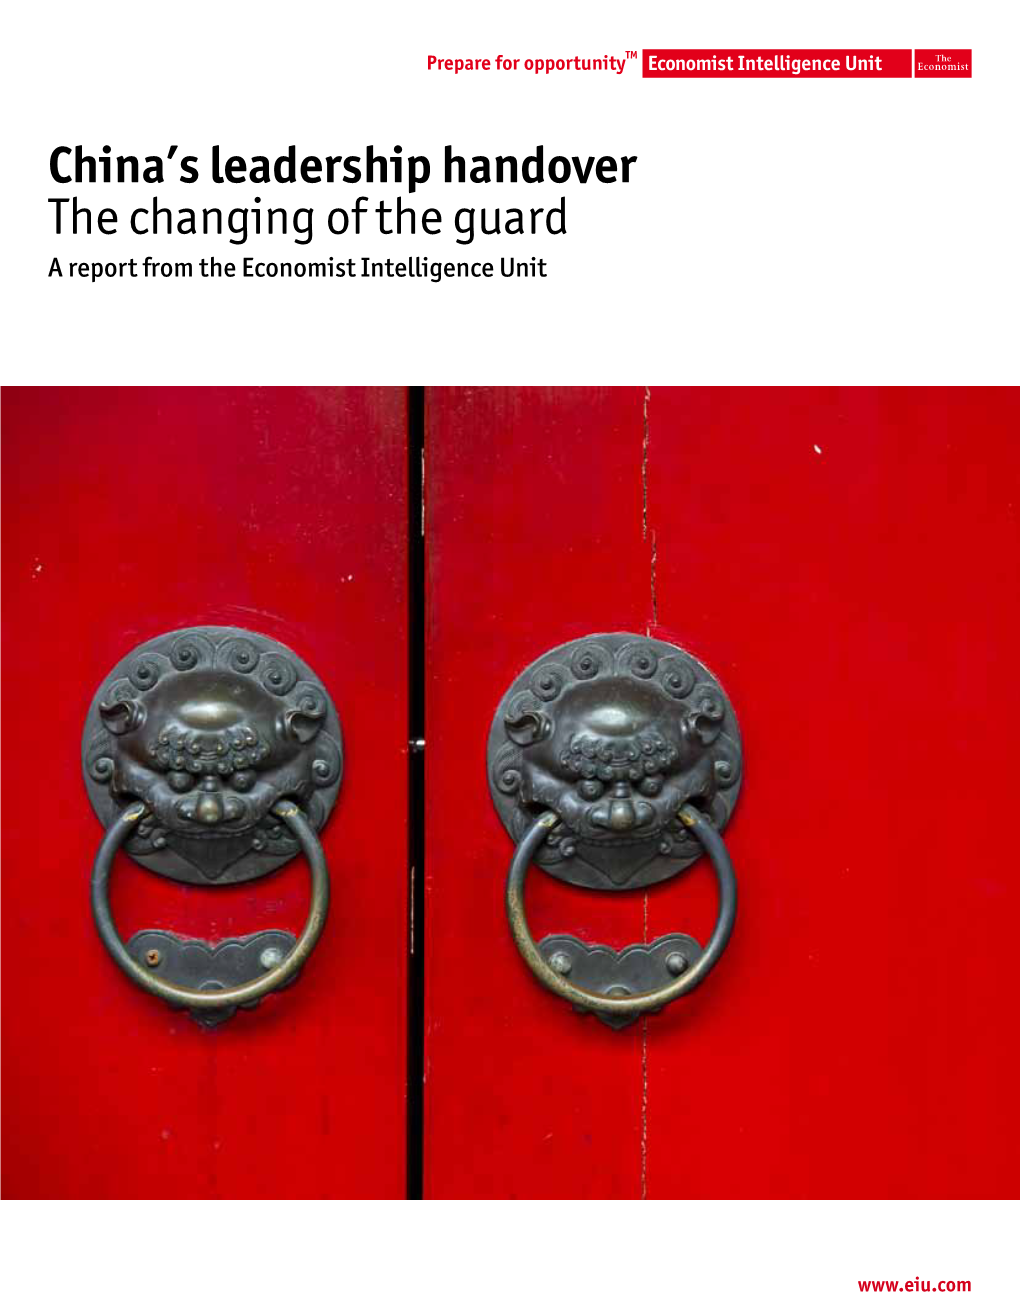 China's Leadership Handover the Changing of the Guard